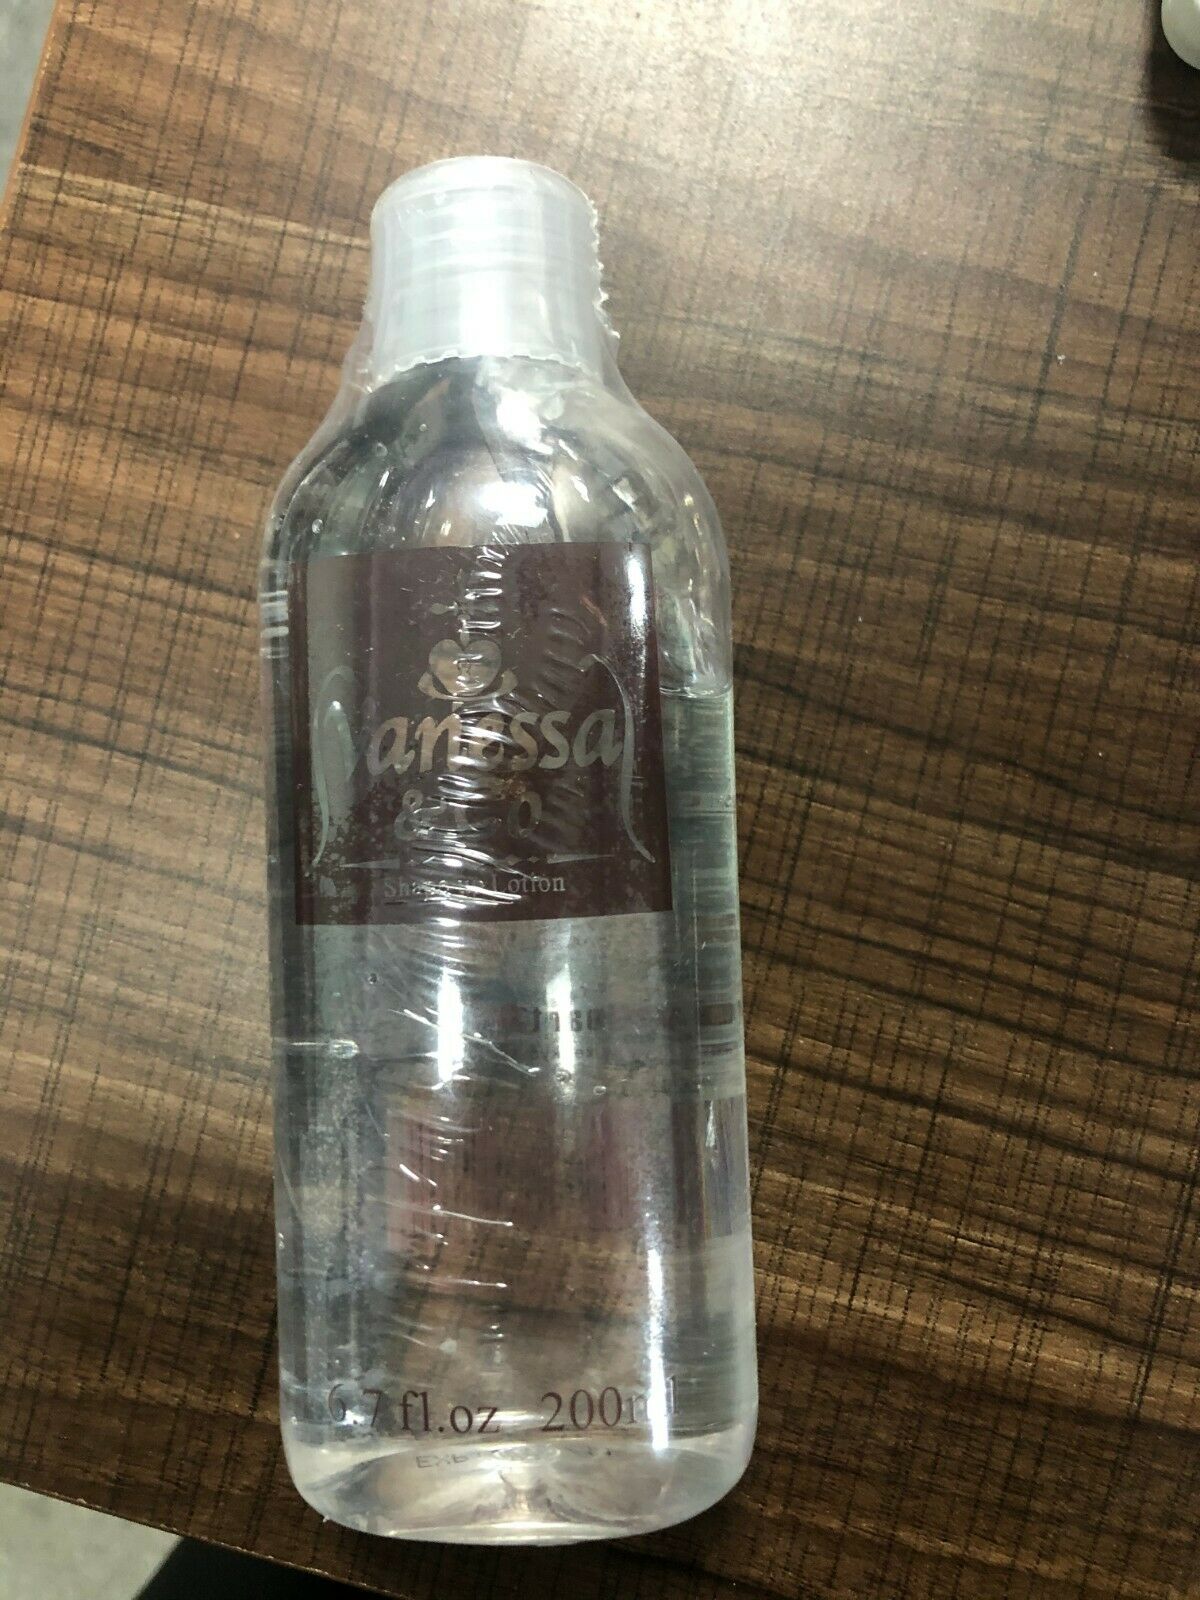 Personal Water Based Lube for Long Lasting Play